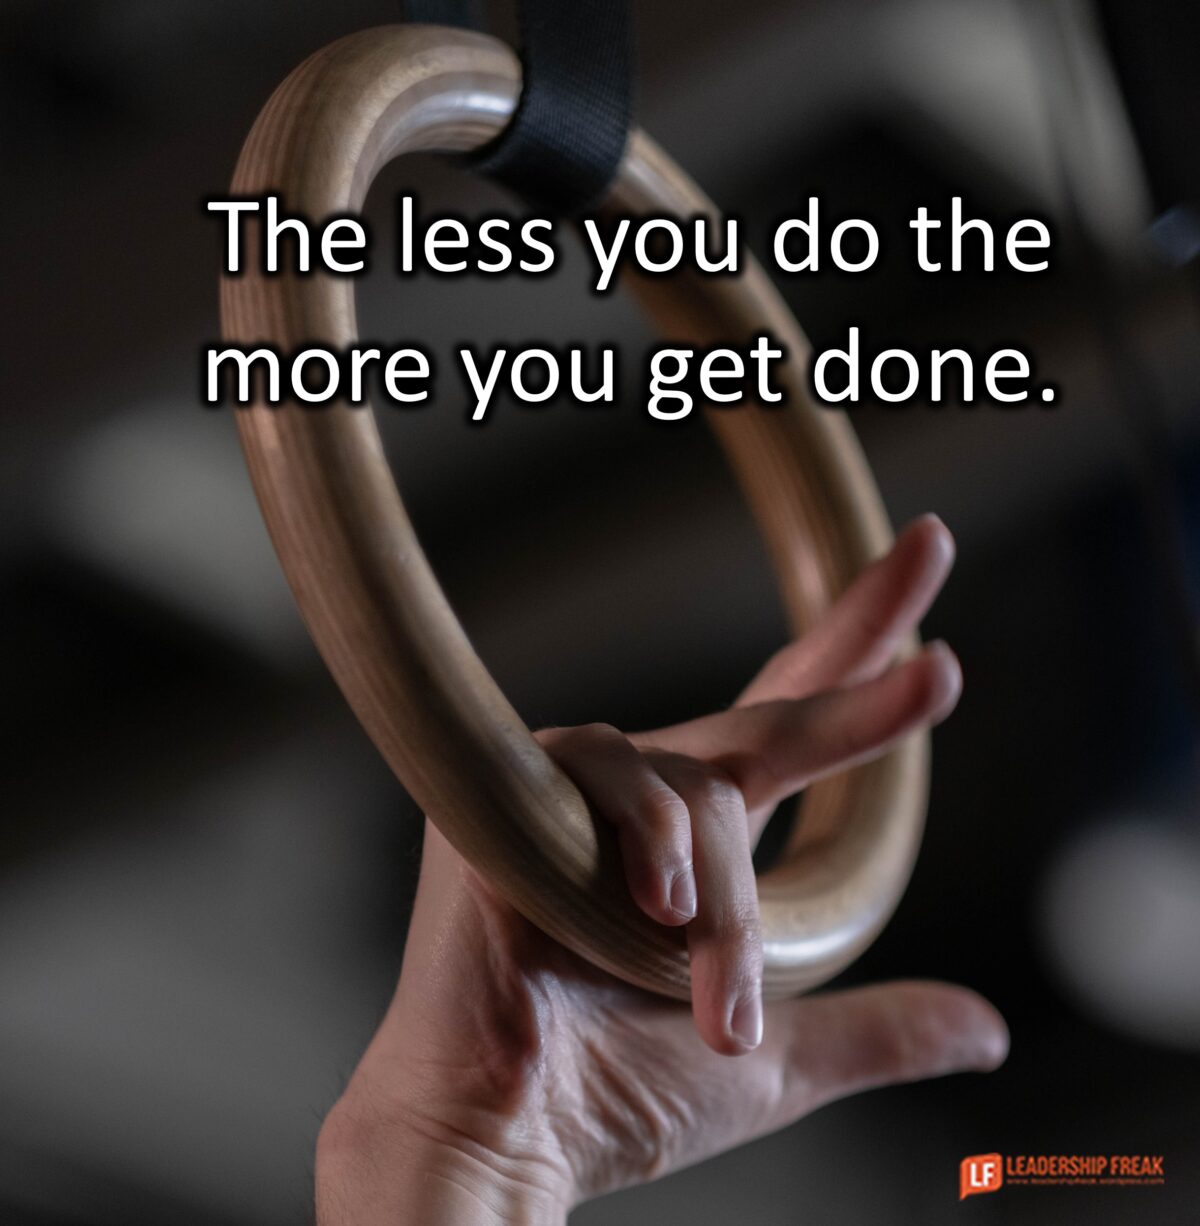 4 Ways to Do Less and Get More Done Today